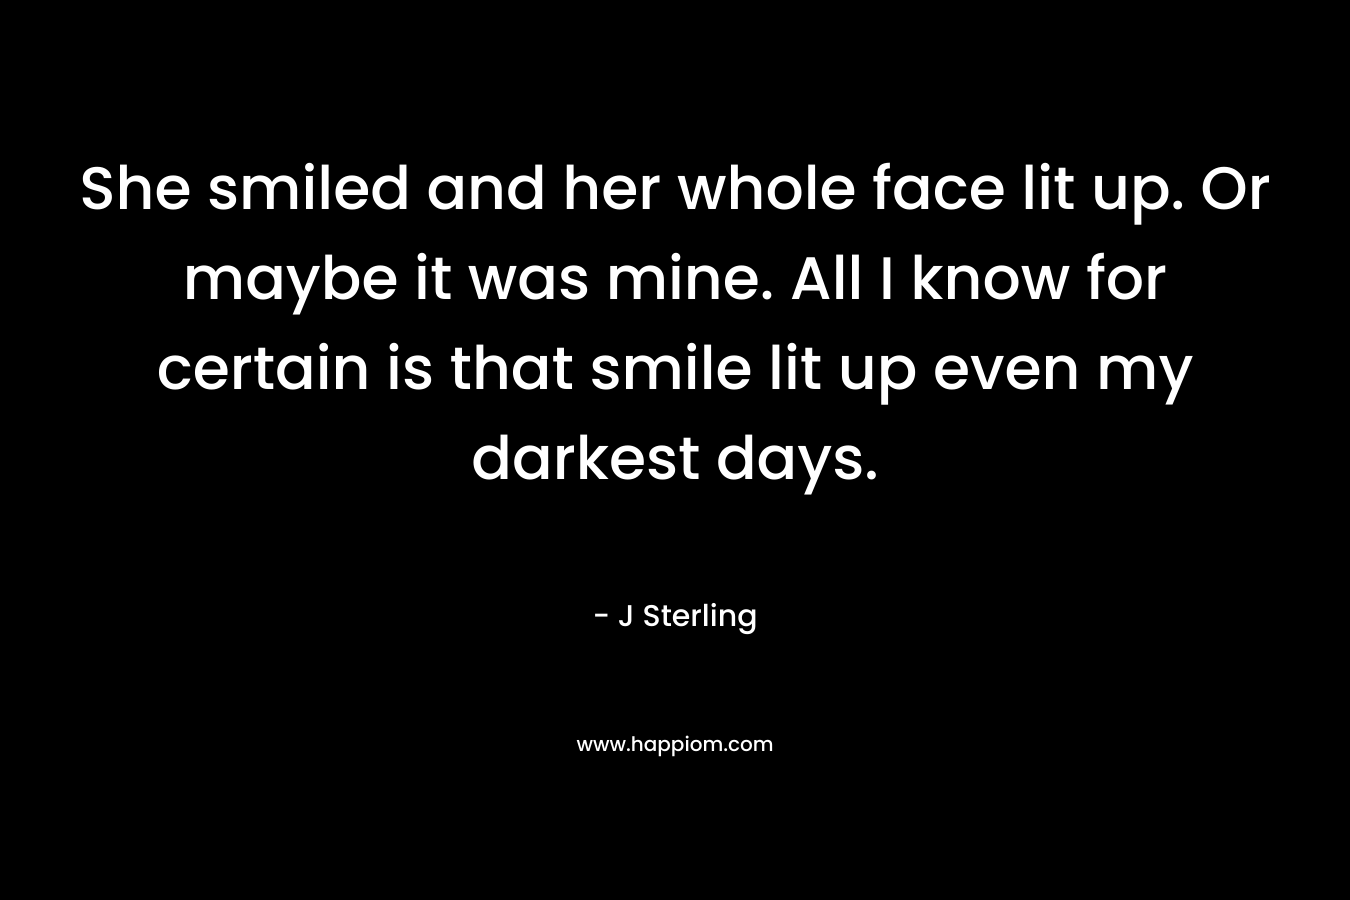 She smiled and her whole face lit up. Or maybe it was mine. All I know for certain is that smile lit up even my darkest days.